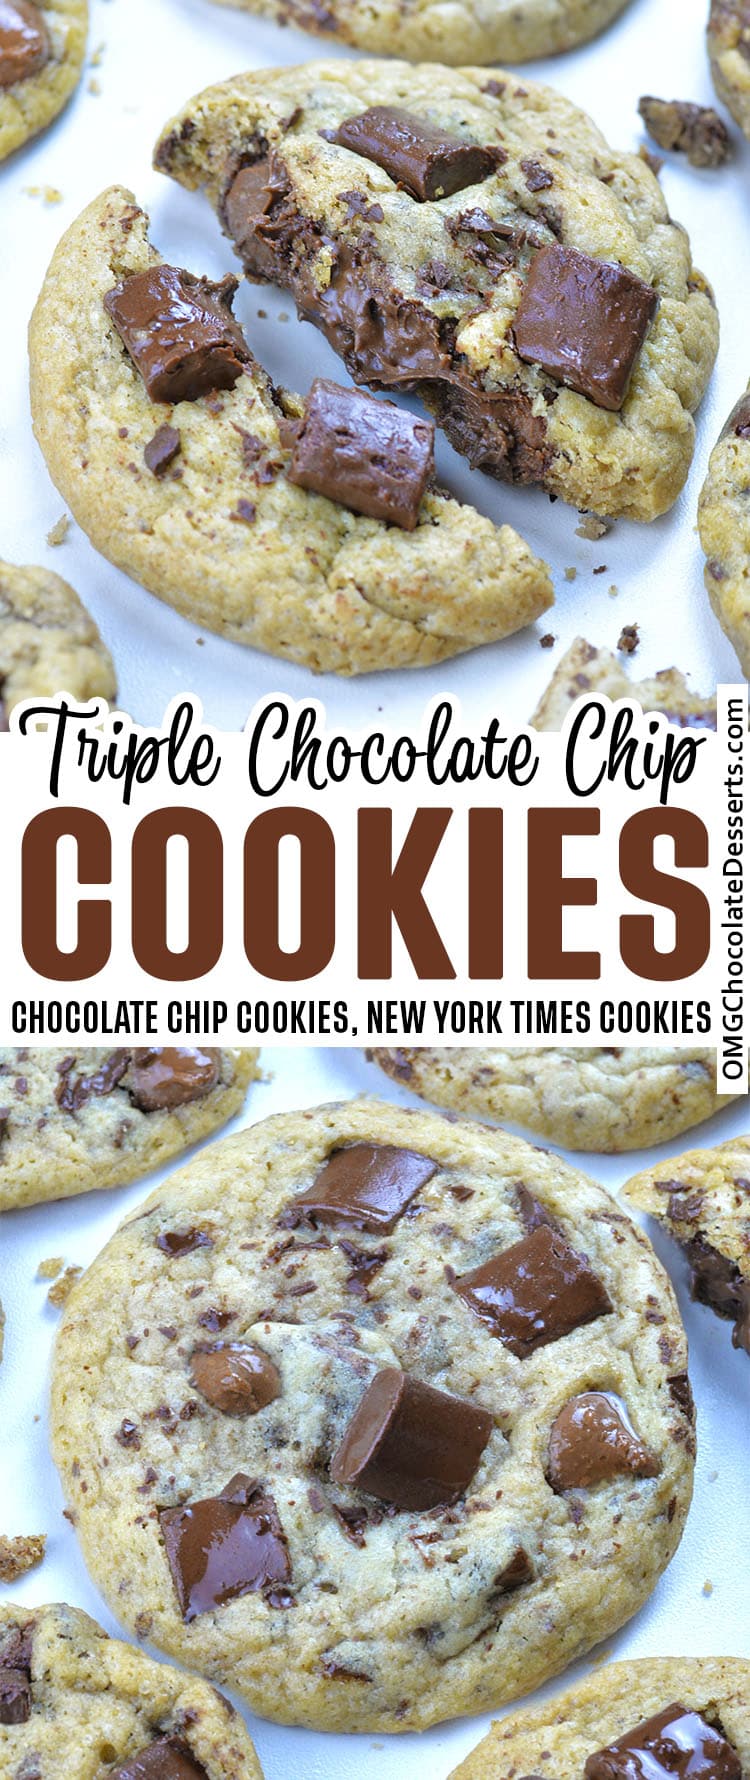 These are triple chocolate cookies with chocolate chips, chocolate shavings, and chocolate chunks. 